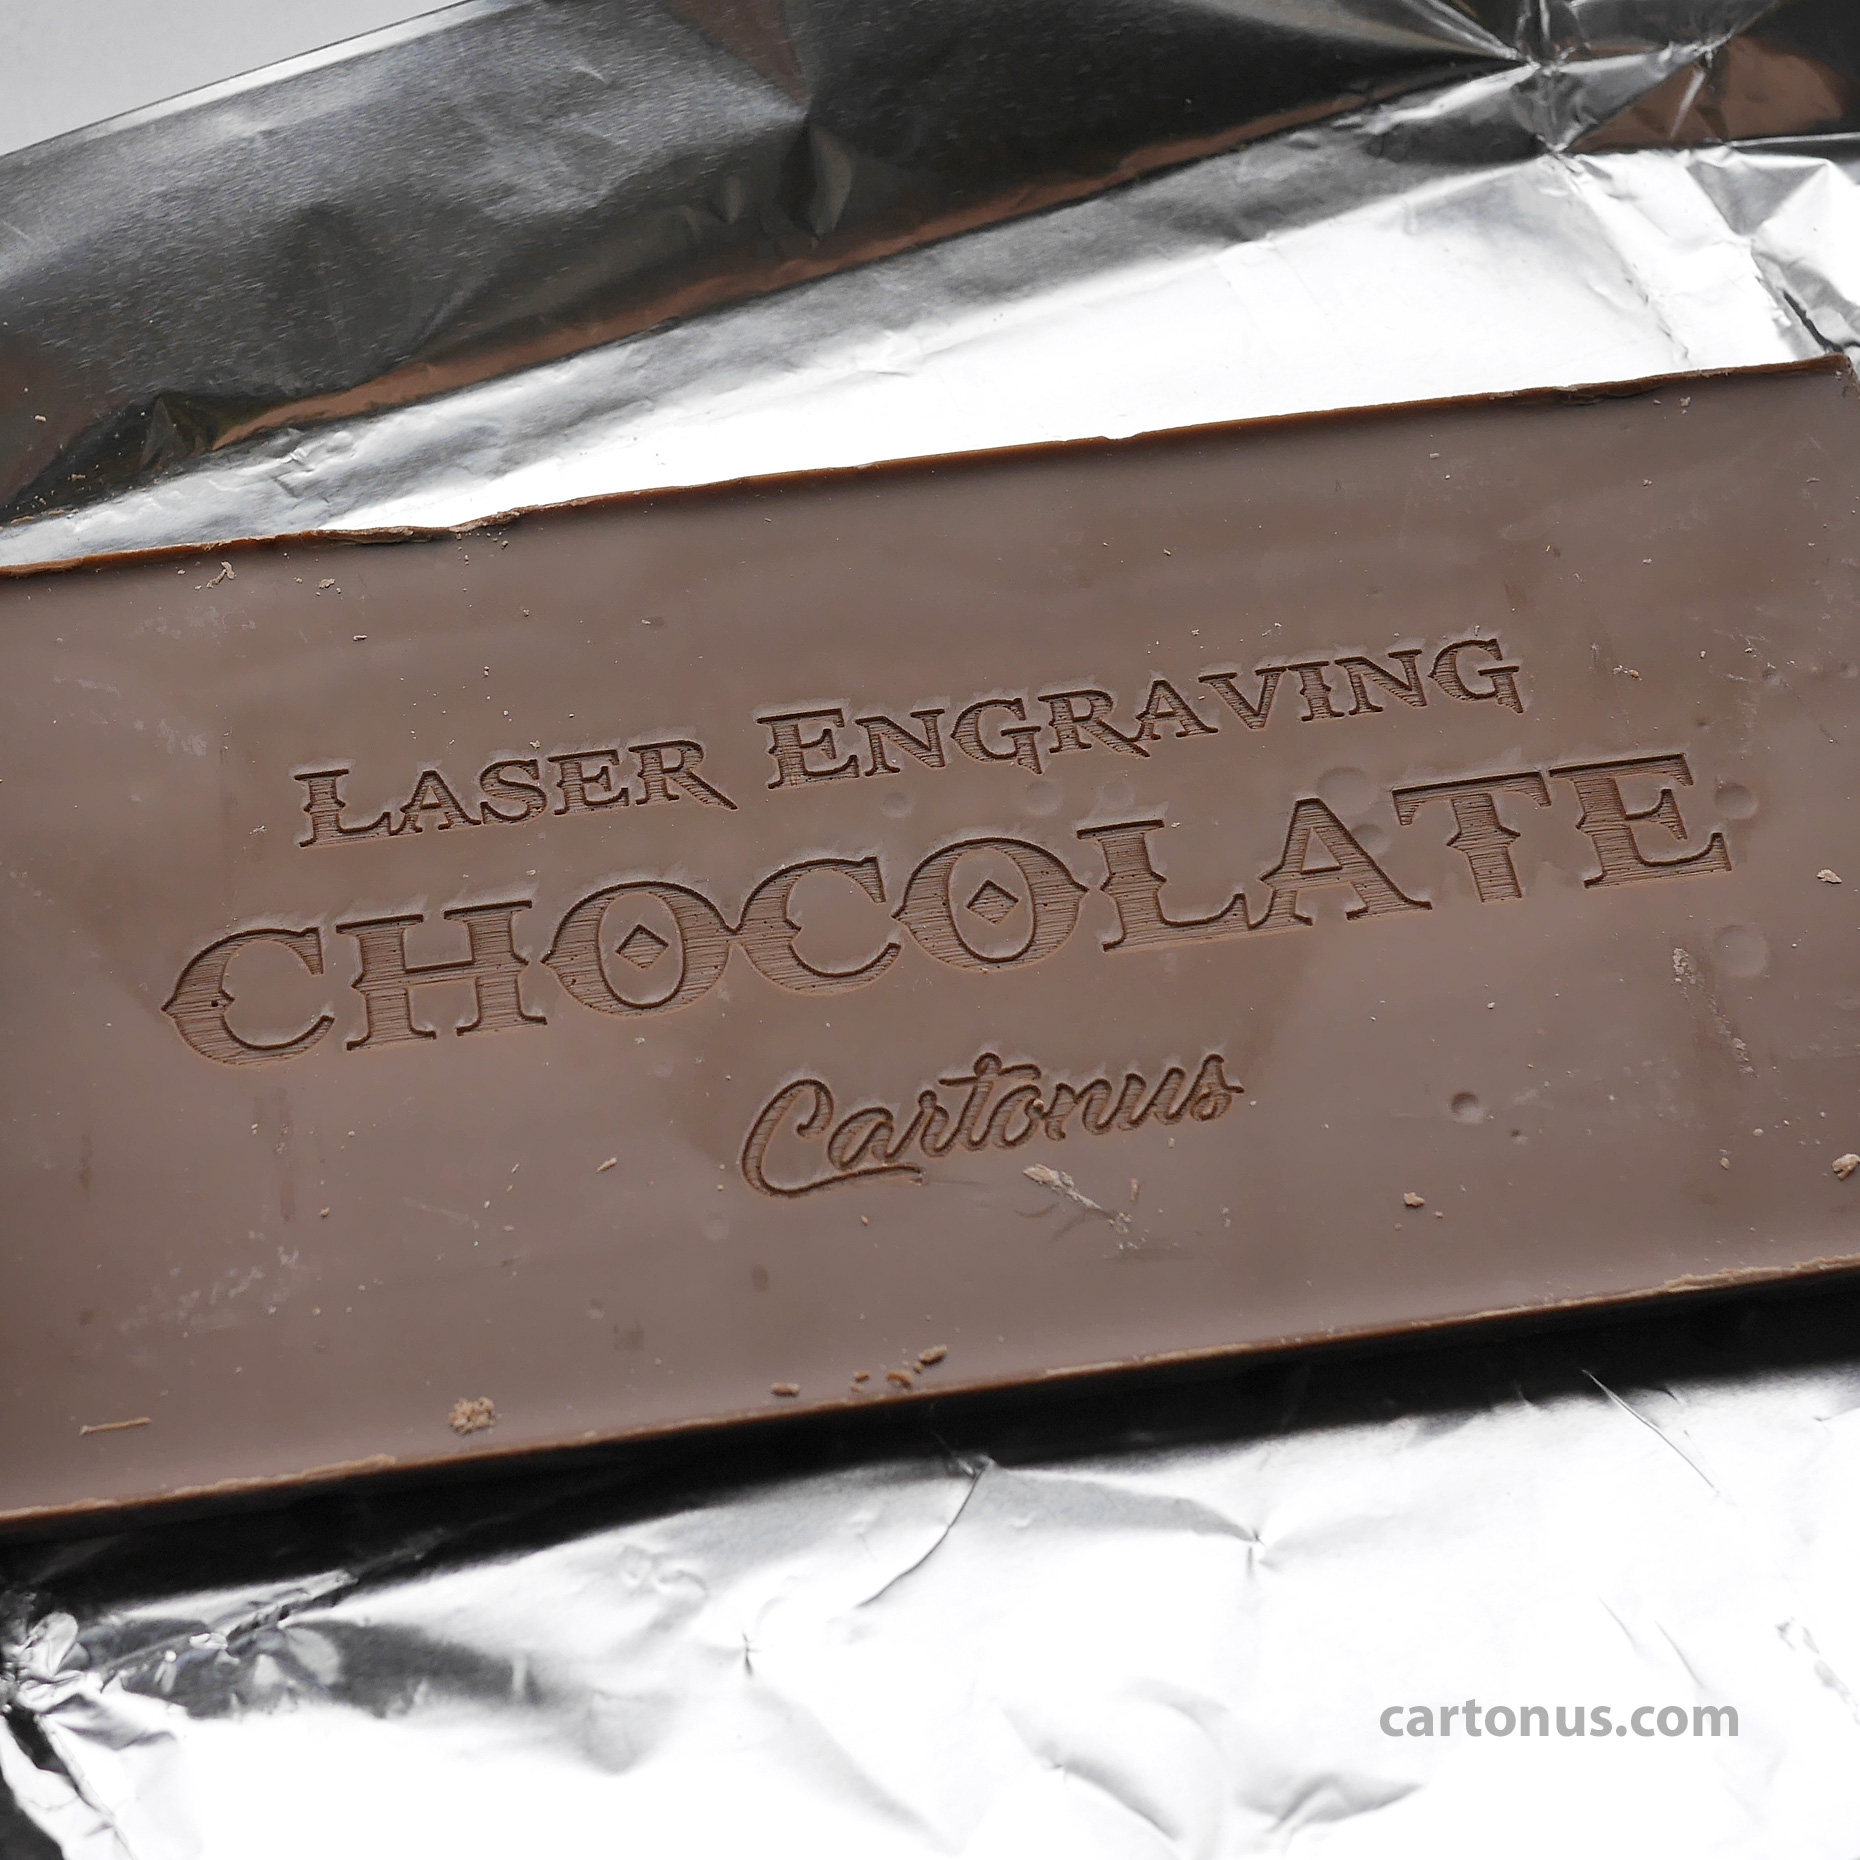 How-to: Laser engraving chocolate with laser engraver